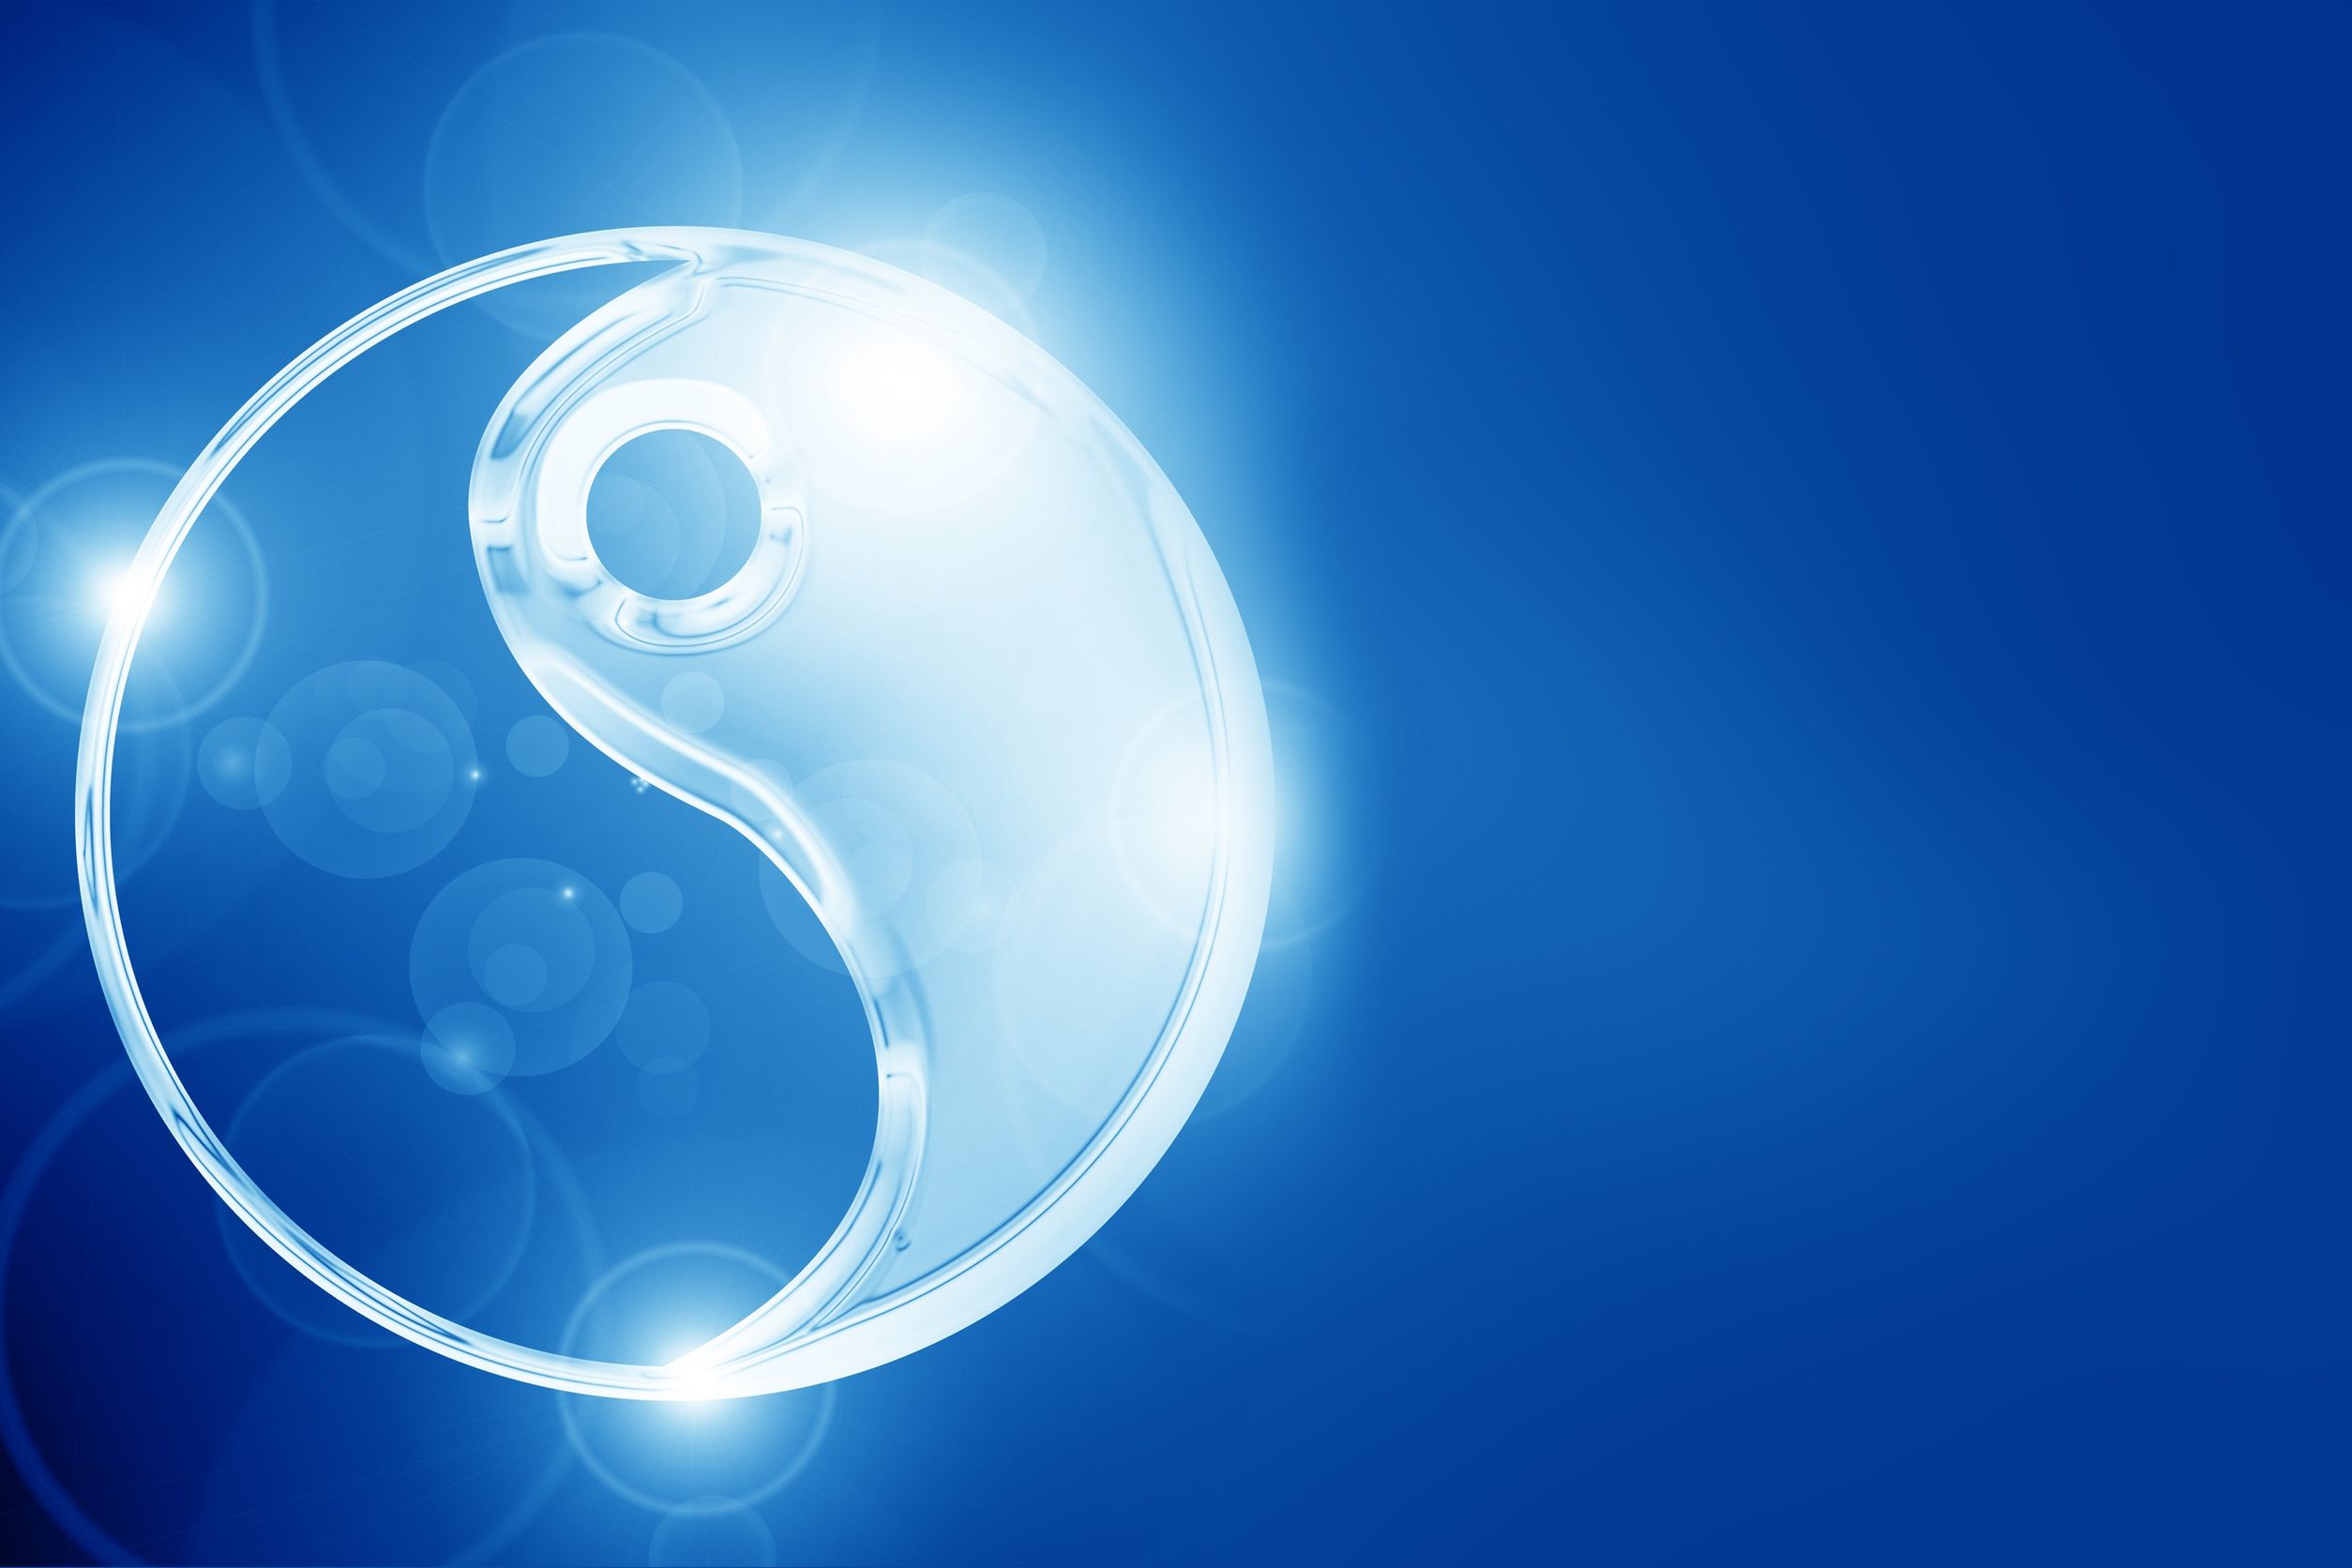 yin yang sign on a glowing background